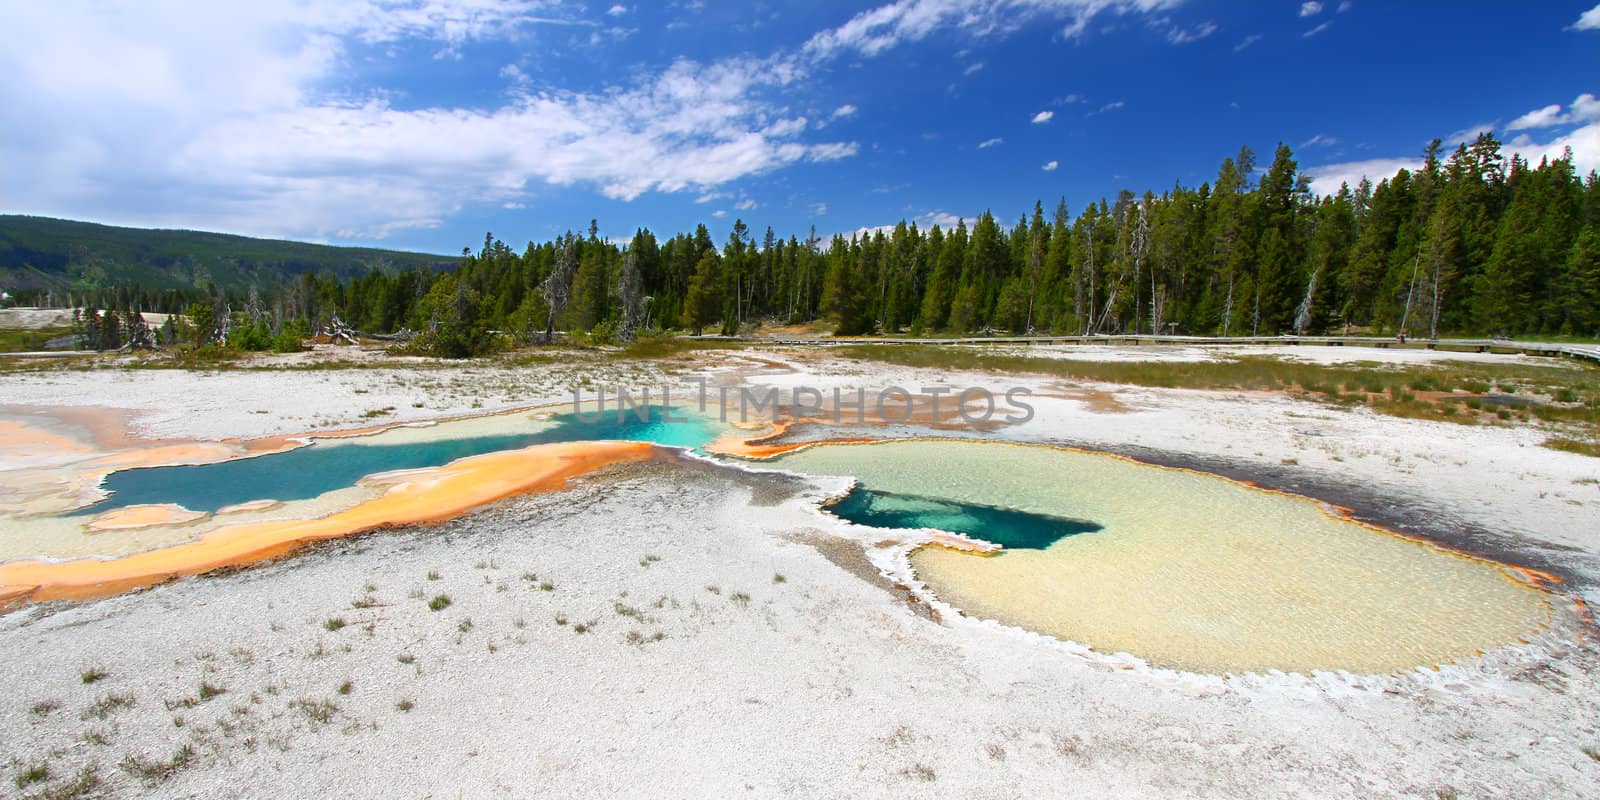 Doublet Pool in the Upper Geyser Basin of Yellowstone National Park.